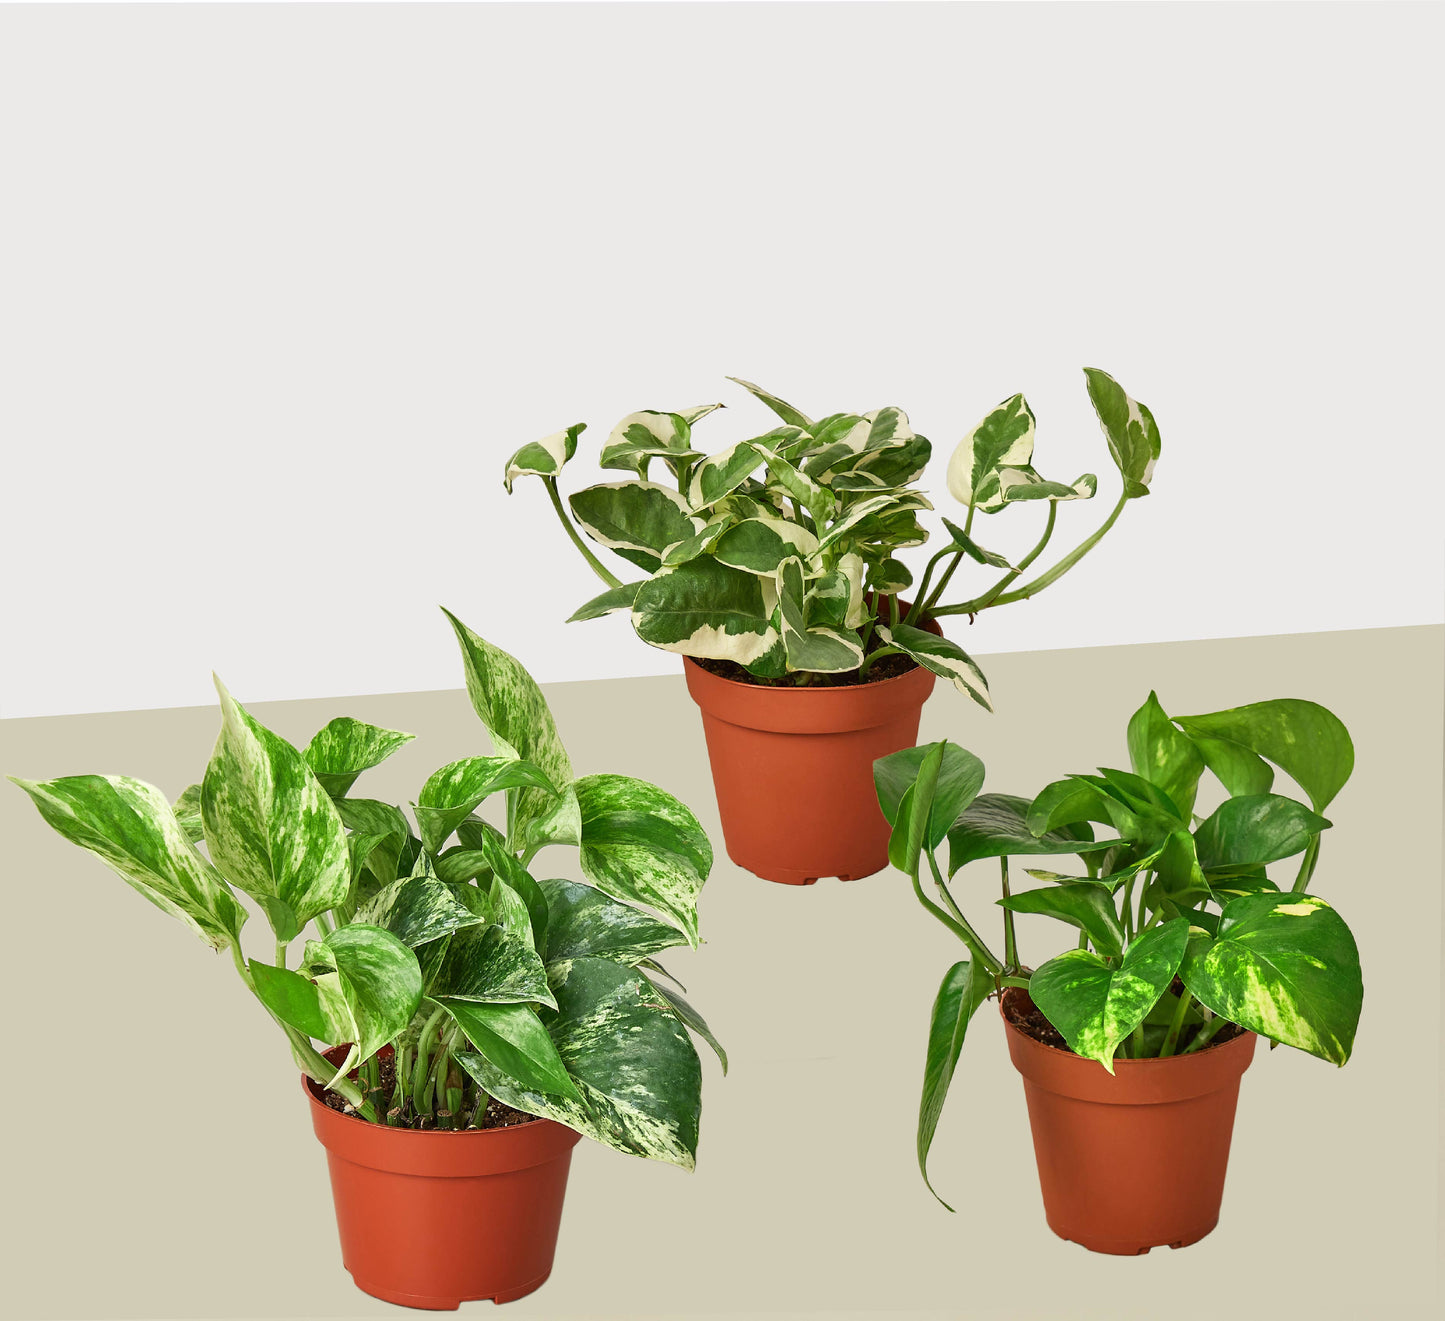 Triple Green Delight: 3 Pothos Variety Pack - 4" Pot Live Plants for Home and Garden, Air Purifying and Easy to Grow